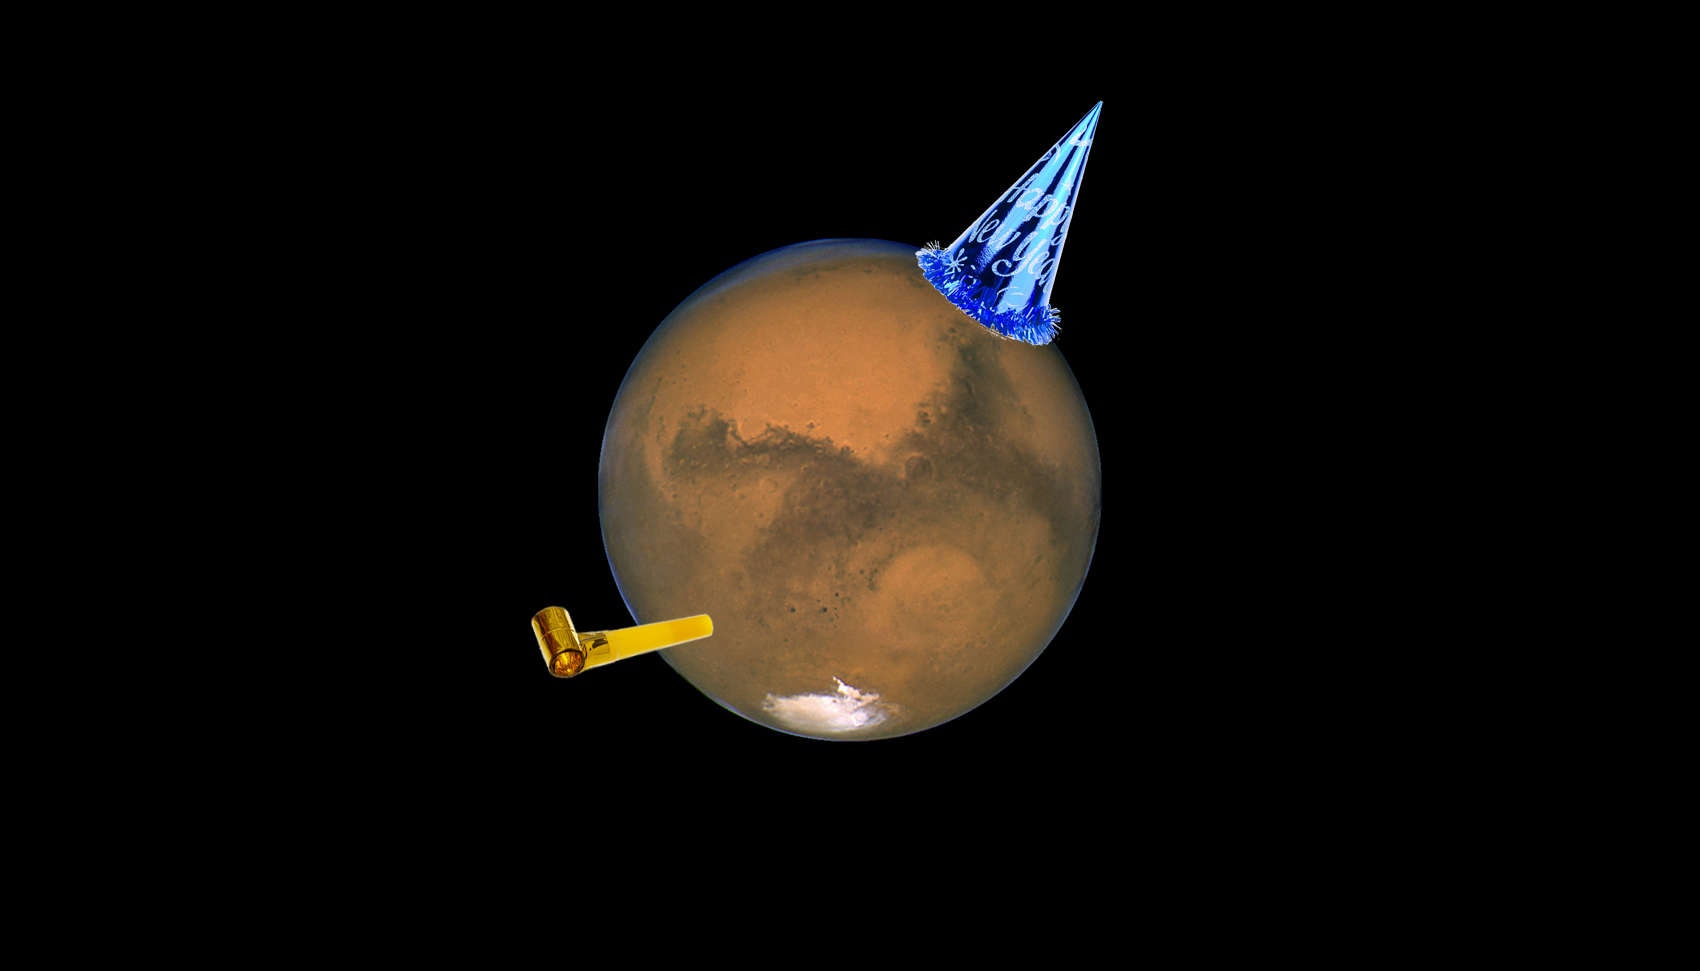 Happy Martian new year! Credit: Getty Images / Fotonen / arsenic and NASA/ESA, J. Bell (Cornell U.) and M. Wolff (SSI)